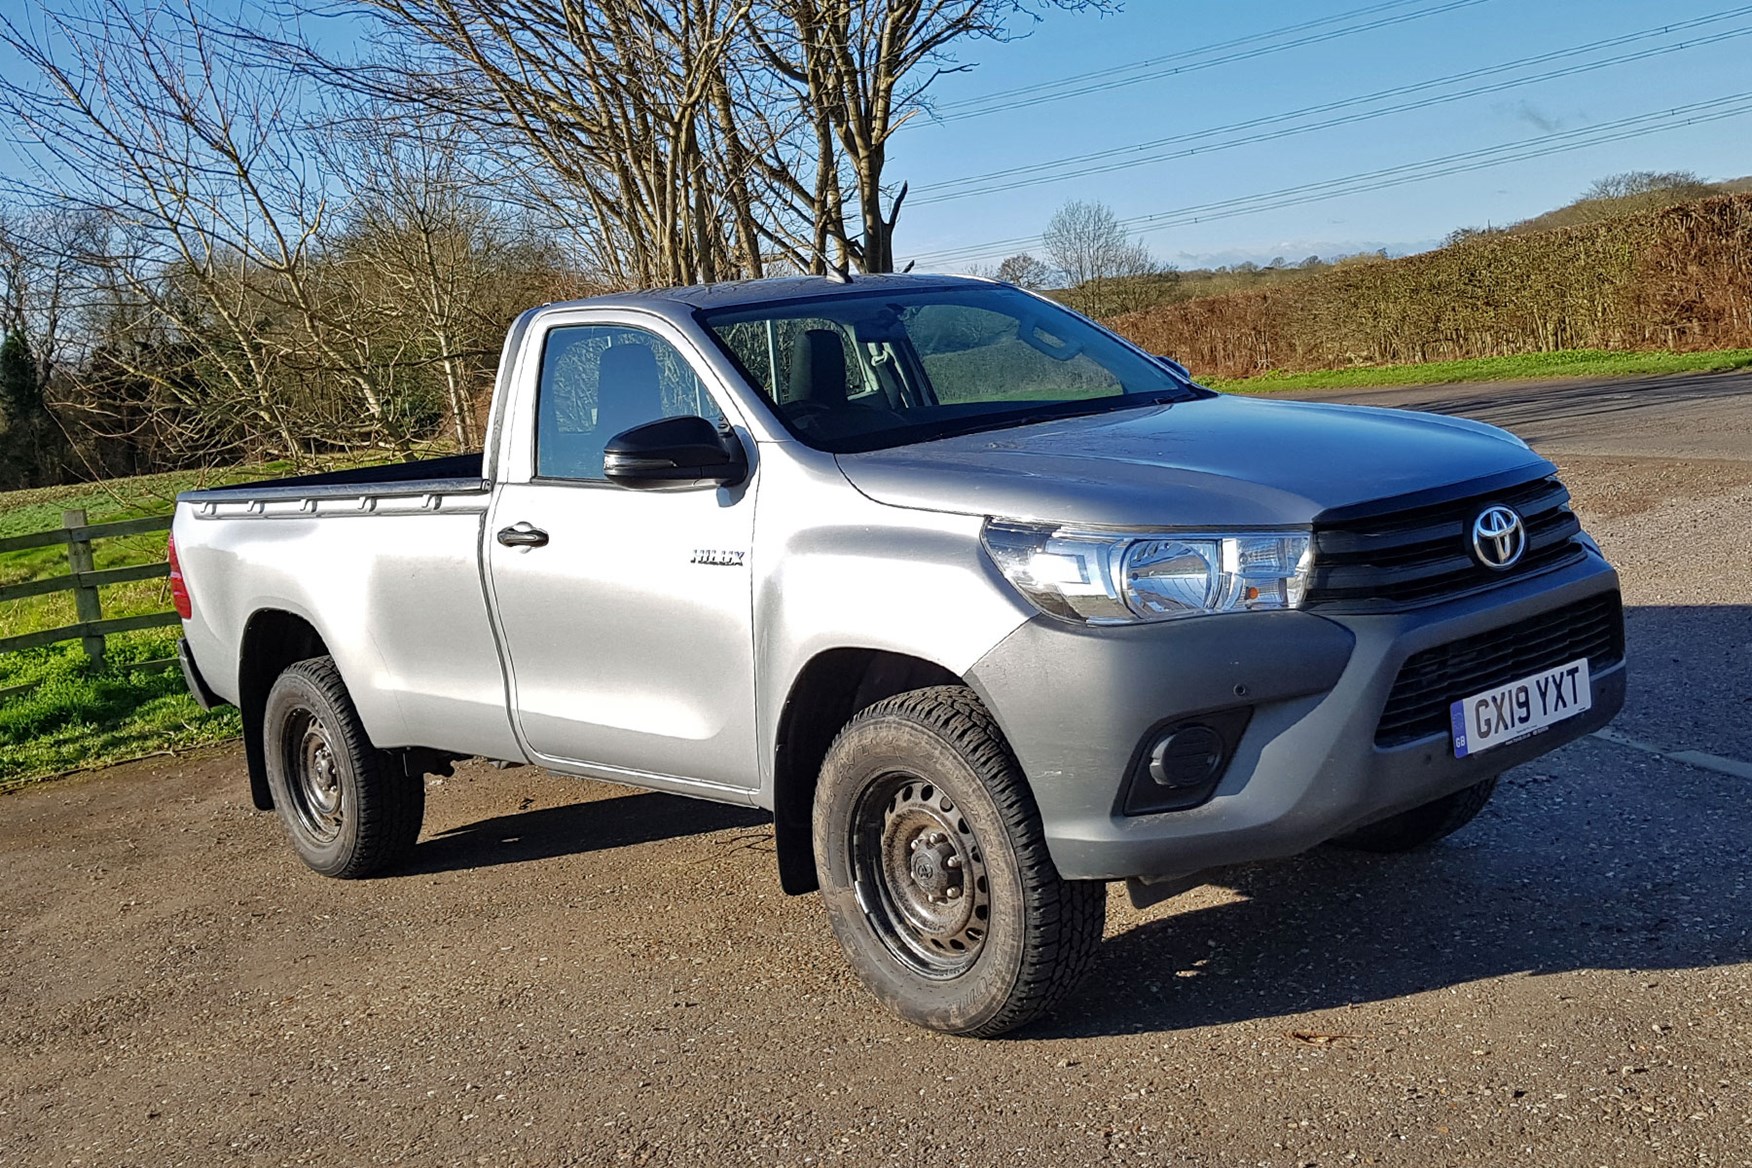 New Hilux: Tougher, Better-Looking, More Capable than ever